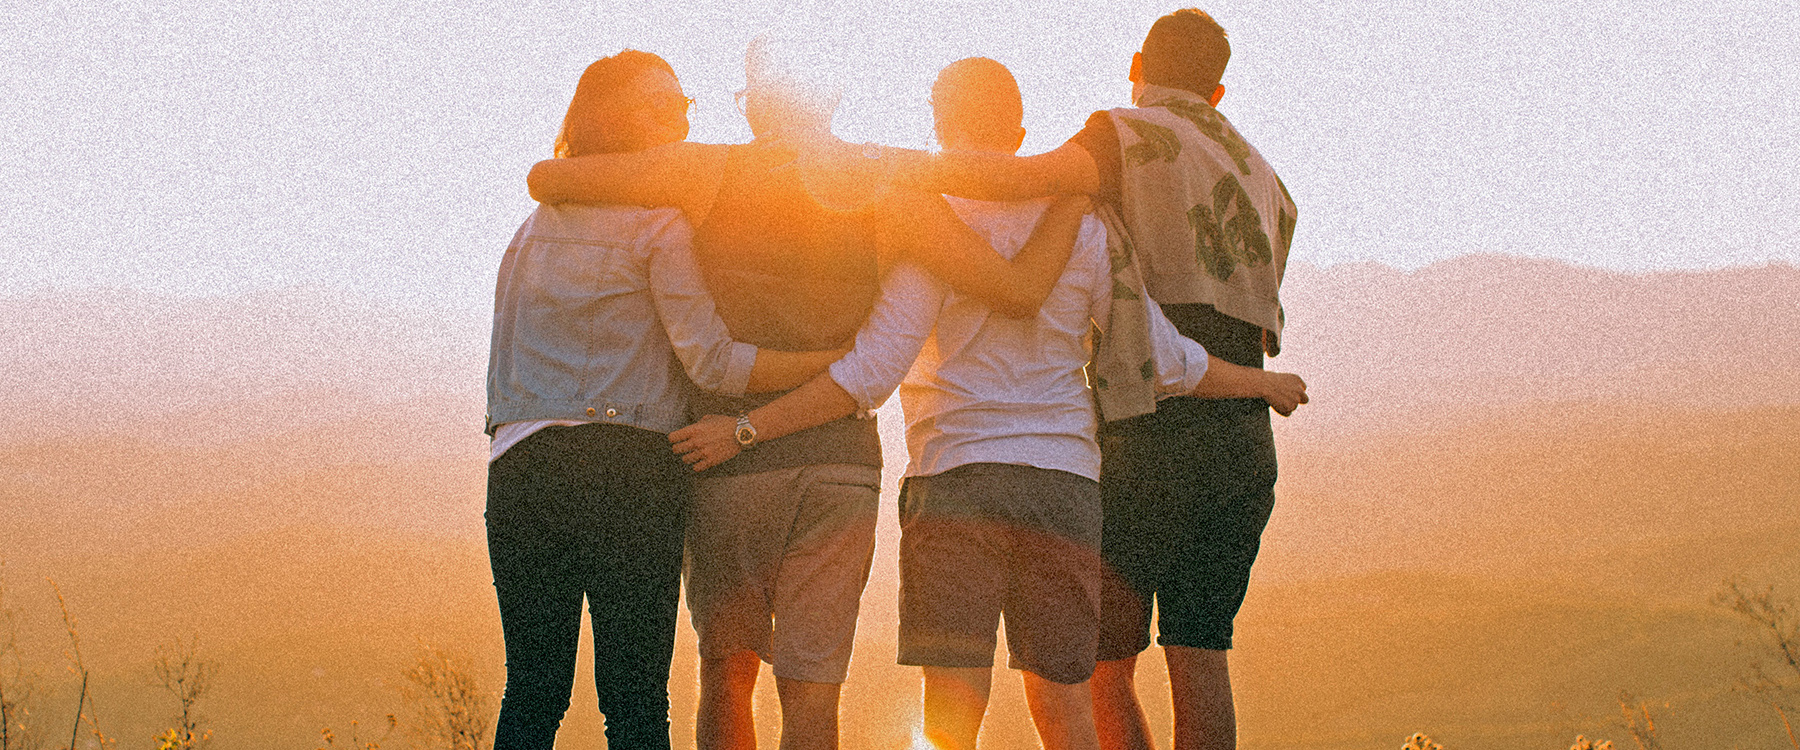 4 people hugging in front of a sunset